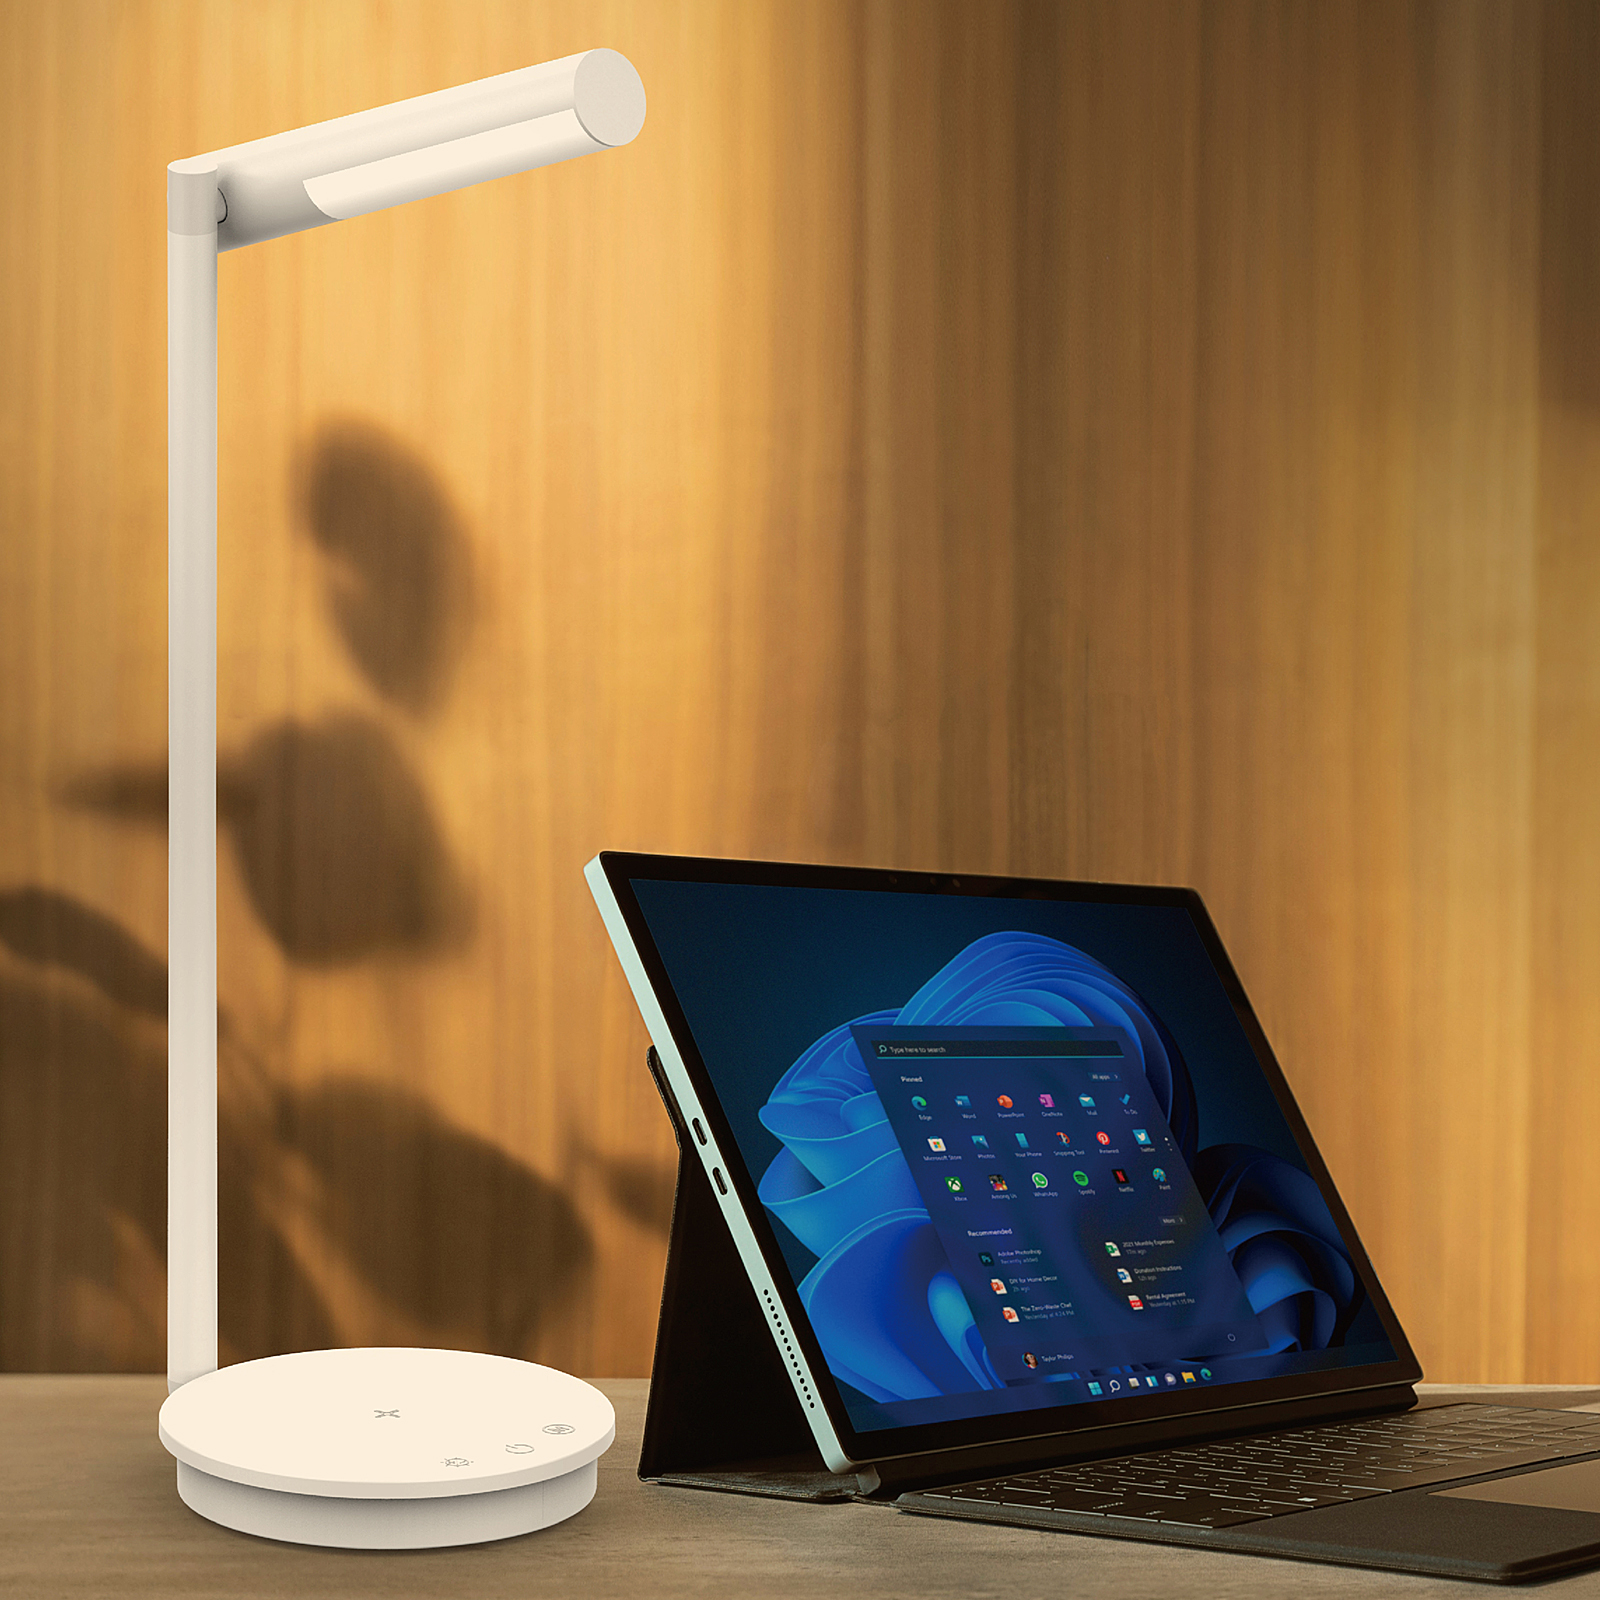 LED Desk Lamp with Wireless Charging